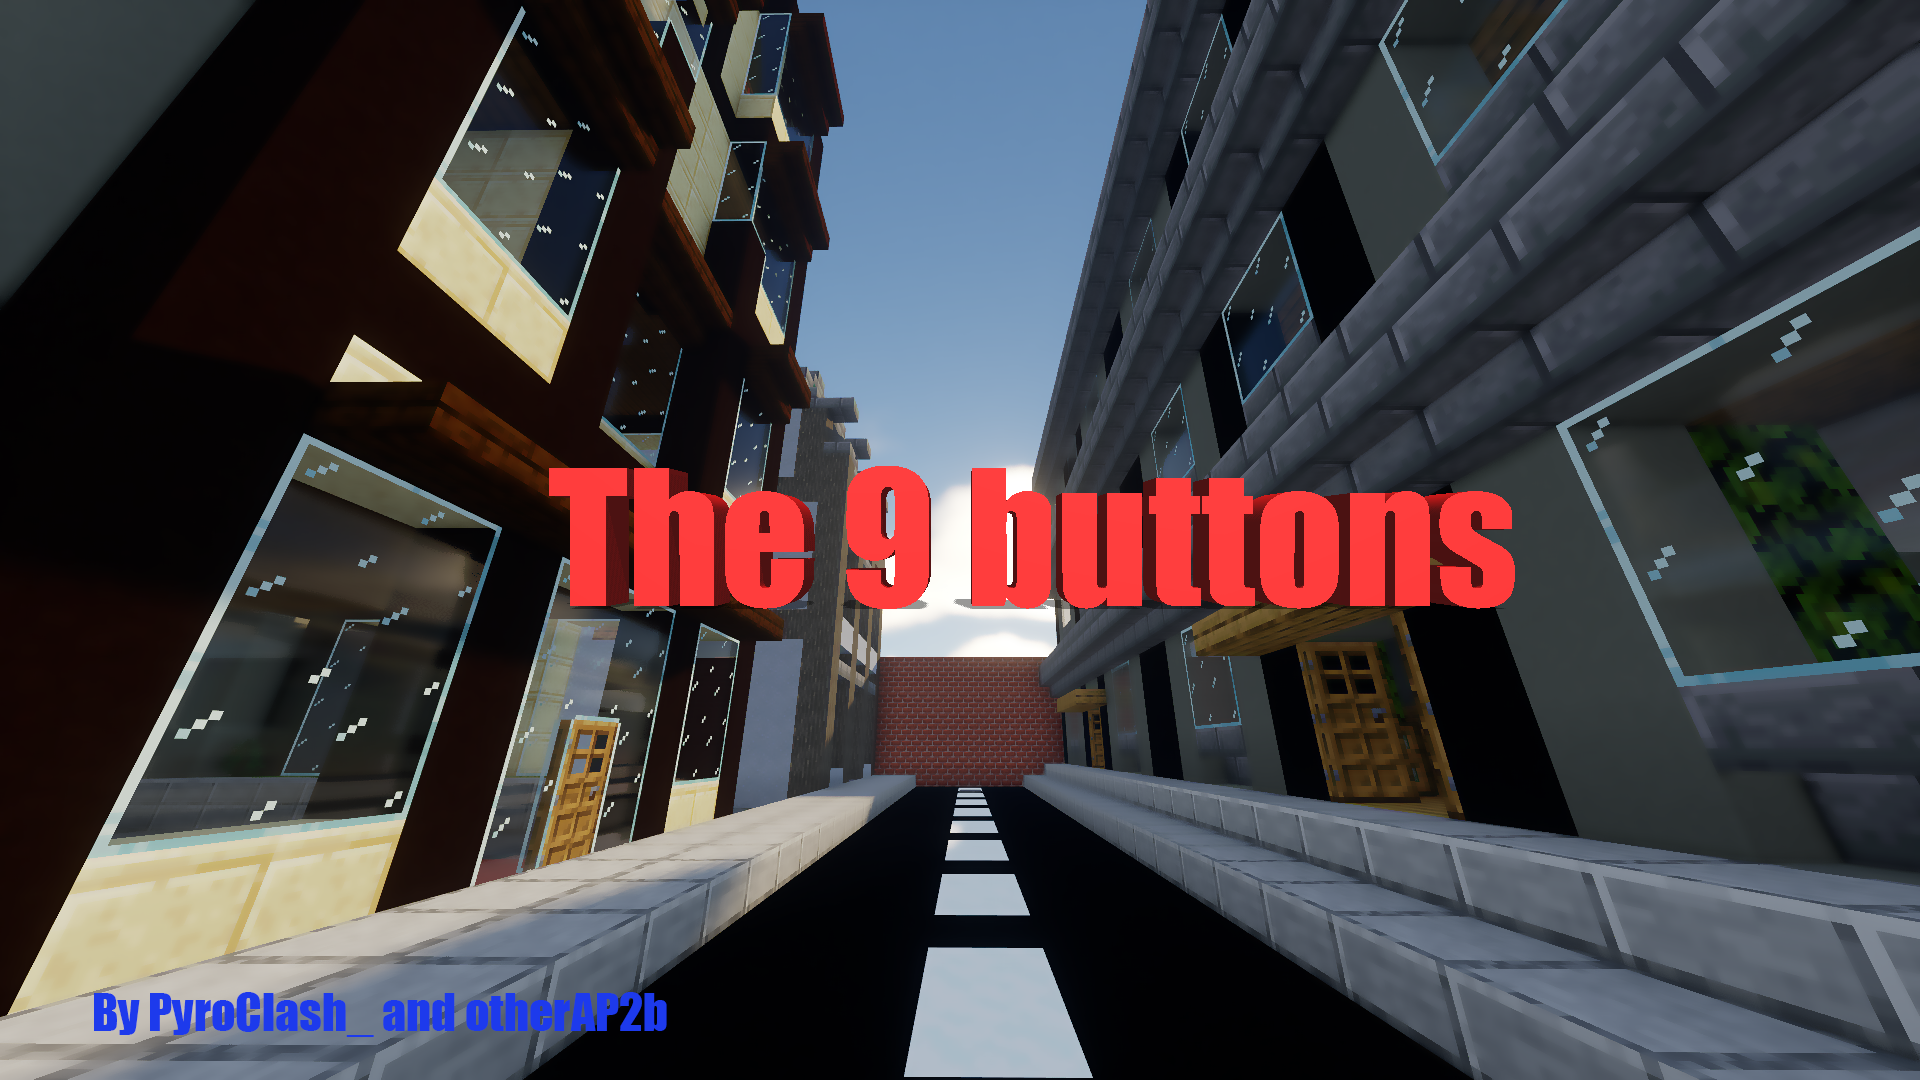 Download The 9 Buttons for Minecraft 1.15.2